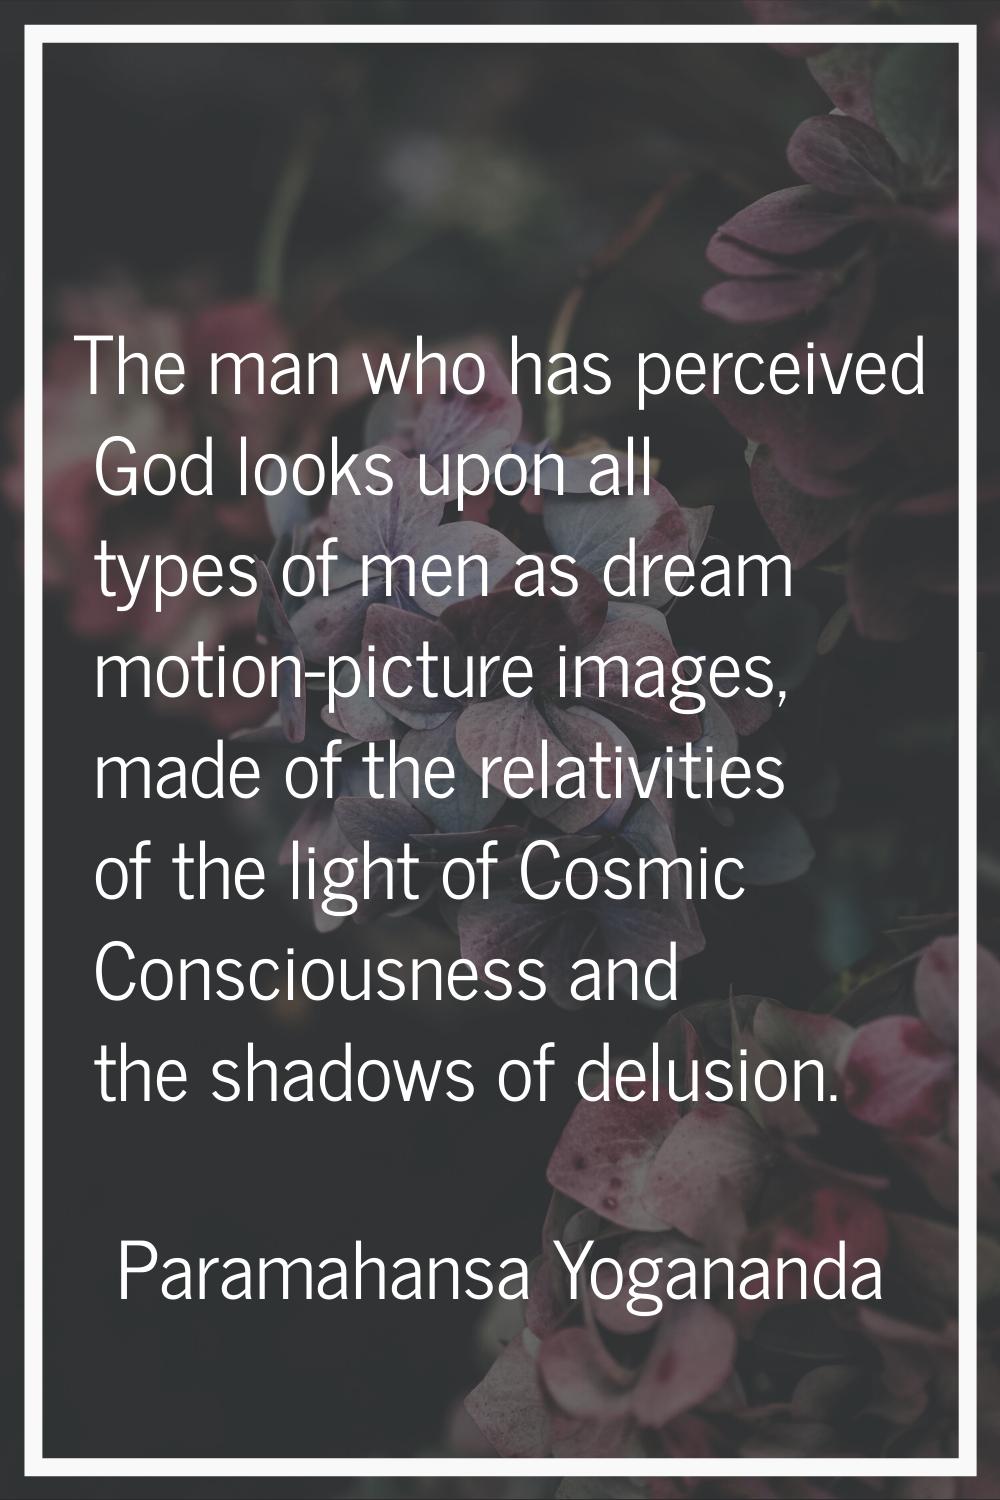 The man who has perceived God looks upon all types of men as dream motion-picture images, made of t